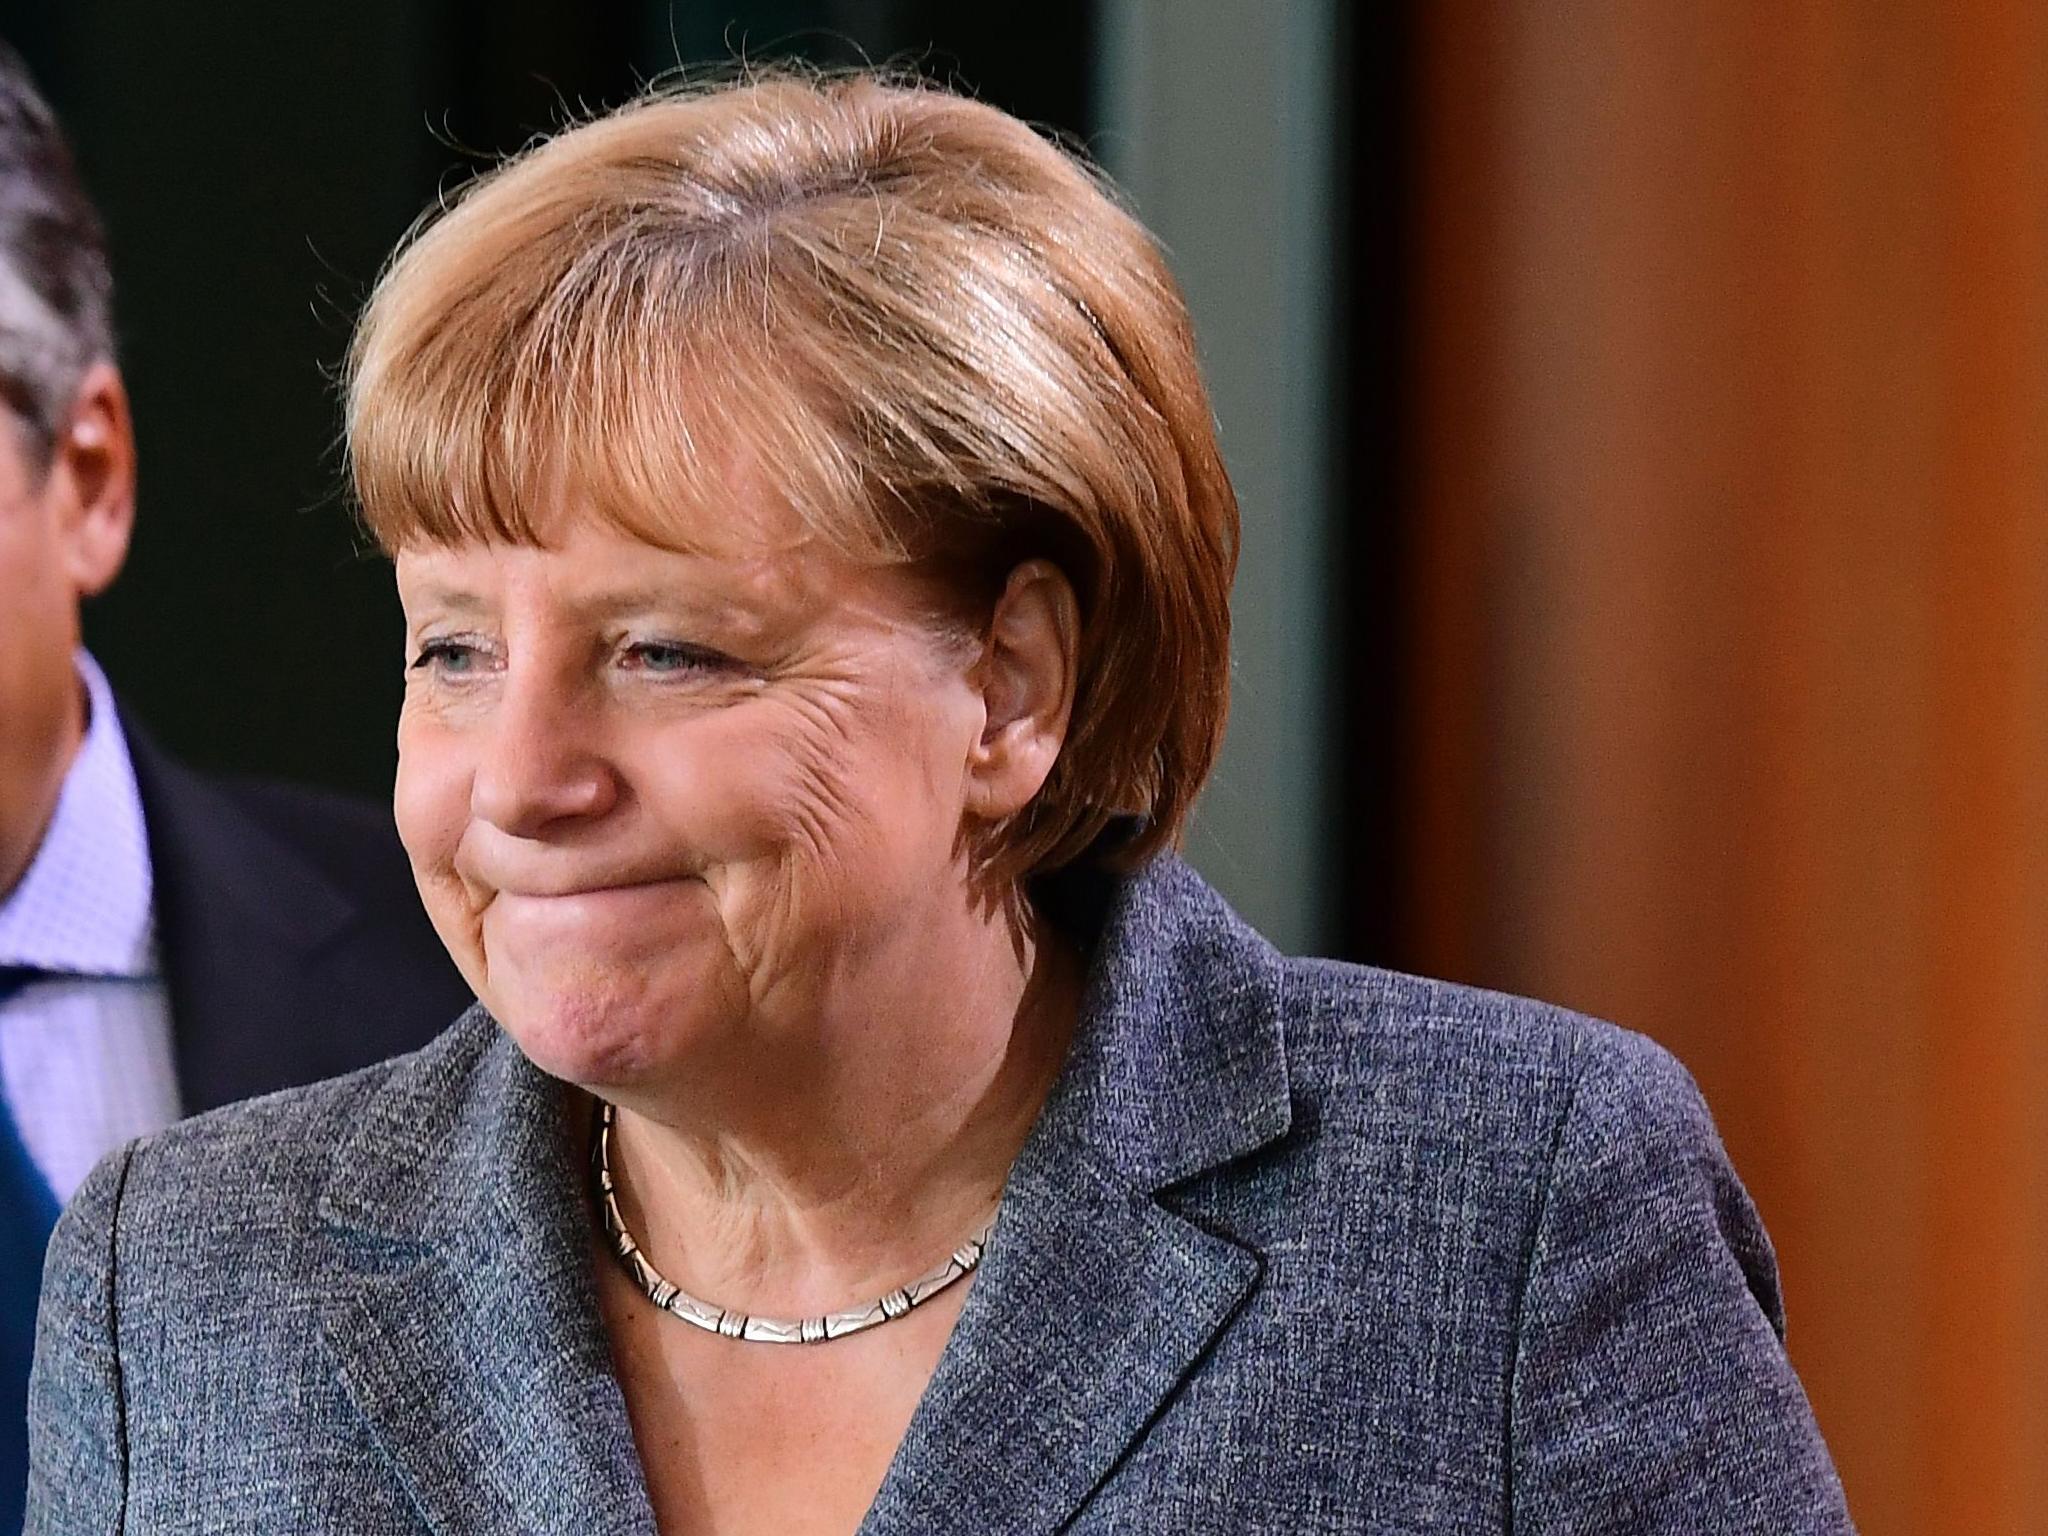 At the end of July, Mrs Merkel flatly rejected calls to alter the country’s refugee policy and stressed that those fleeing persecution had the right to be protected